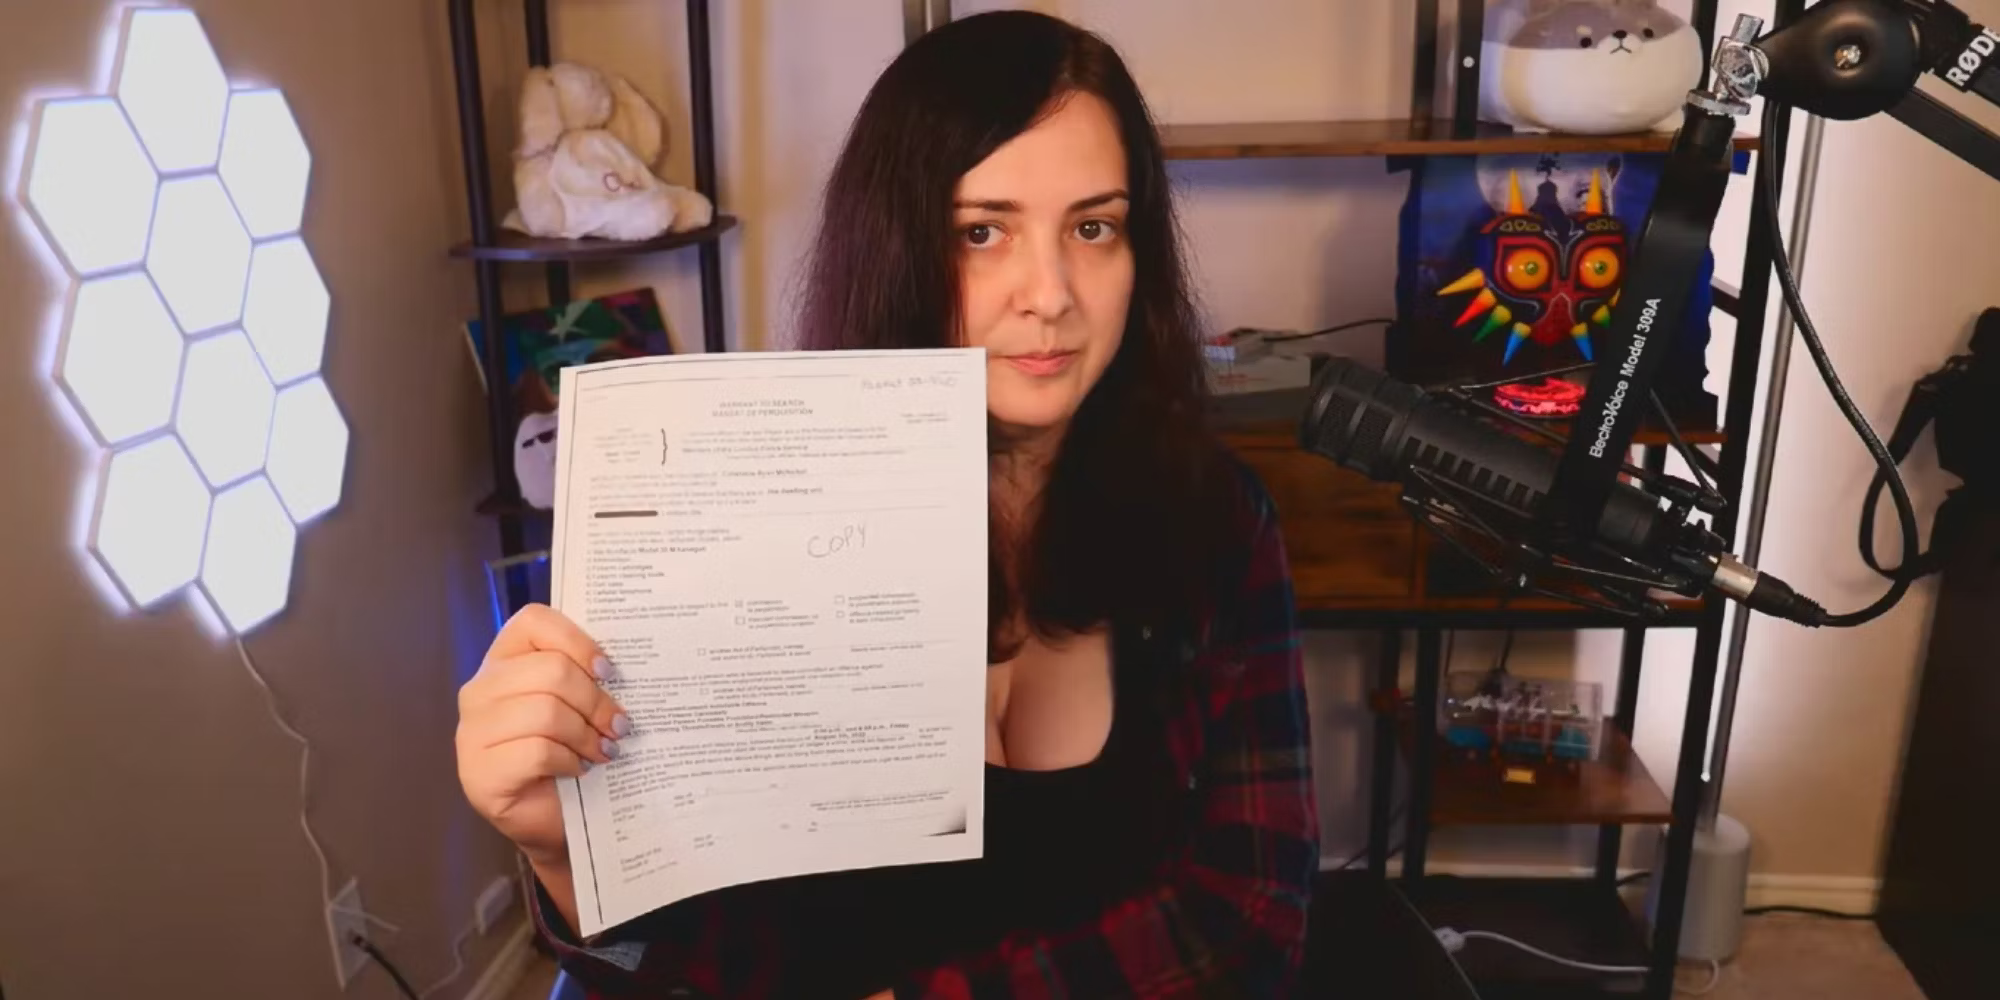 A photo of Keffals in her room holding a police document